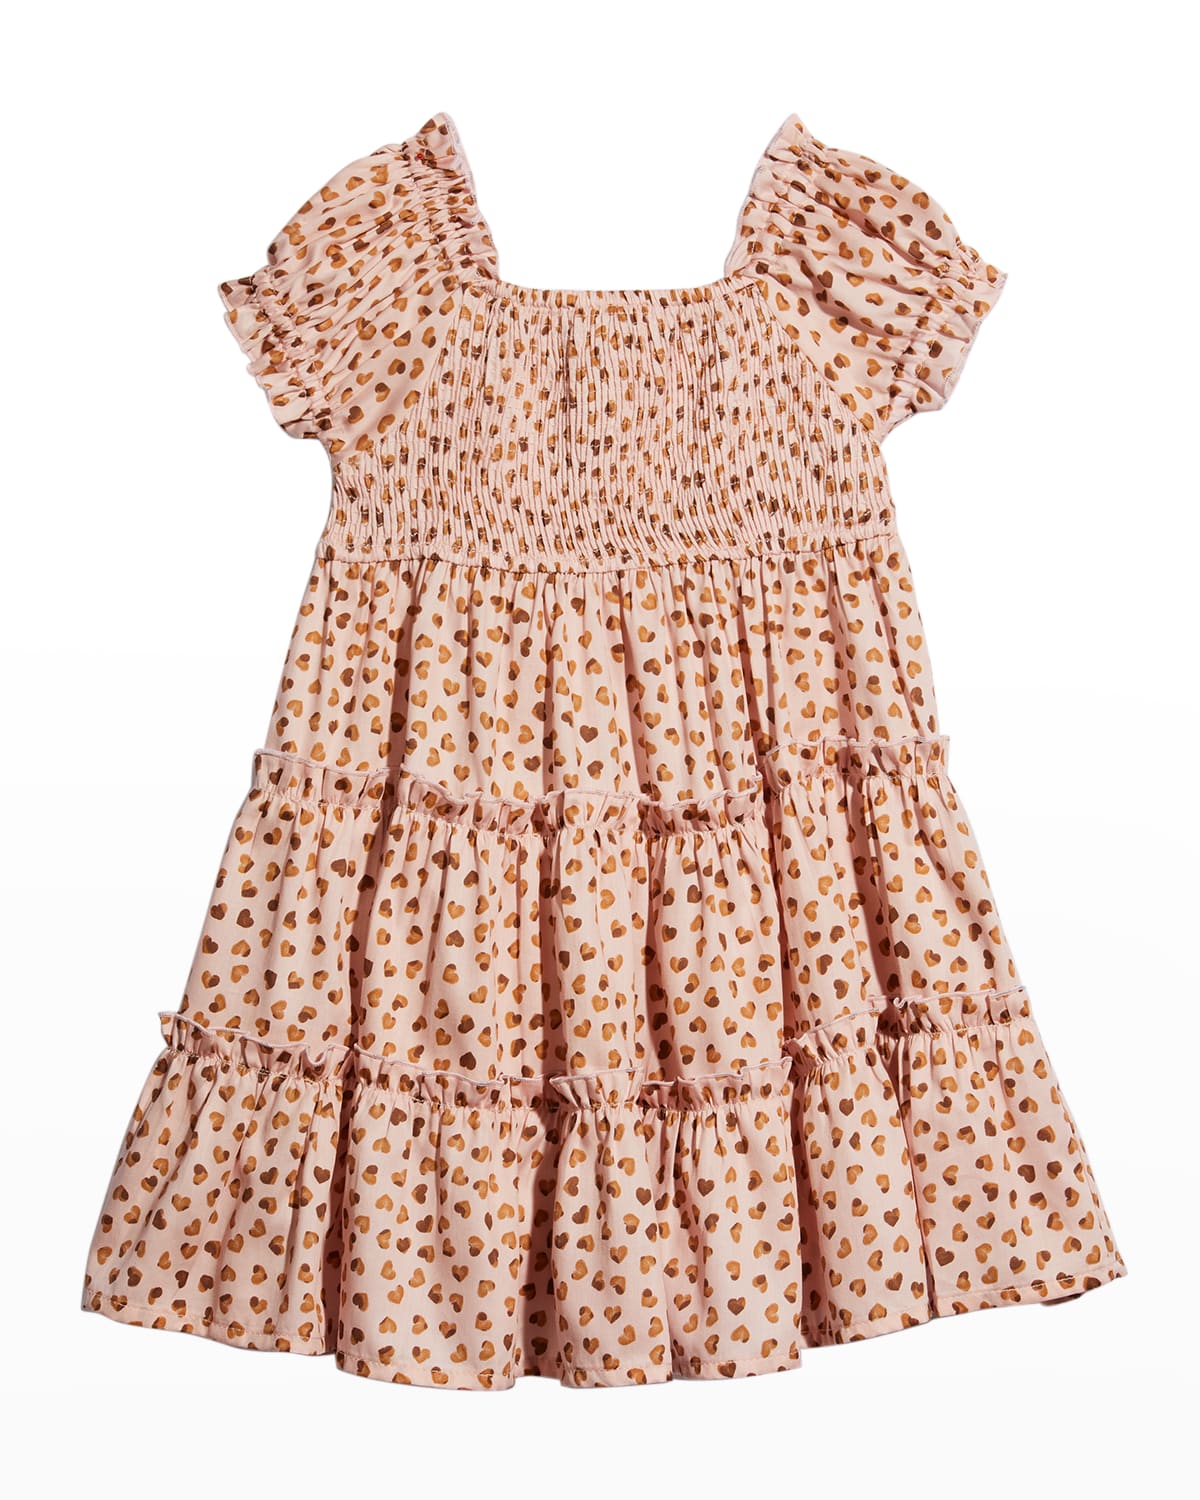 MAYORAL GIRL'S POLKA-DOT TIERED TULLE DRESS